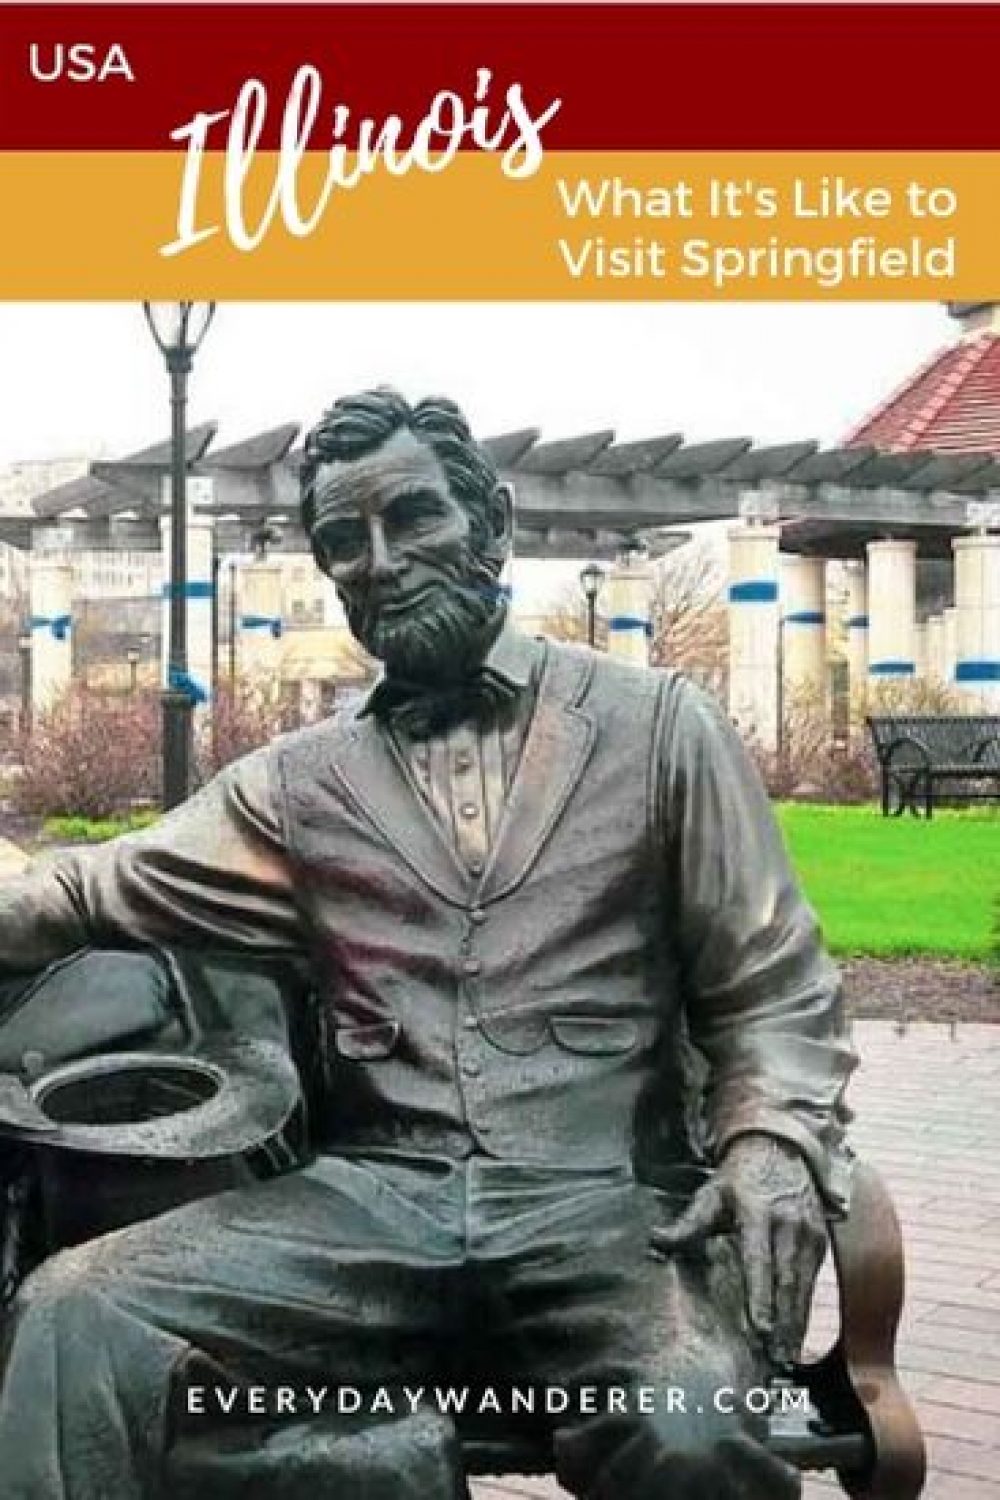 Springfield Illinois things to do including the Abraham Lincoln Presidential Library and other recommendations for Springfield Illinois with kids. See the Dana-Thomas House designed by Frank Lloyd Wright, eat at great Springfield Illinois restaurants and enjoy craft beer. #springfield #illinois #us #usa #travel #mwtravel